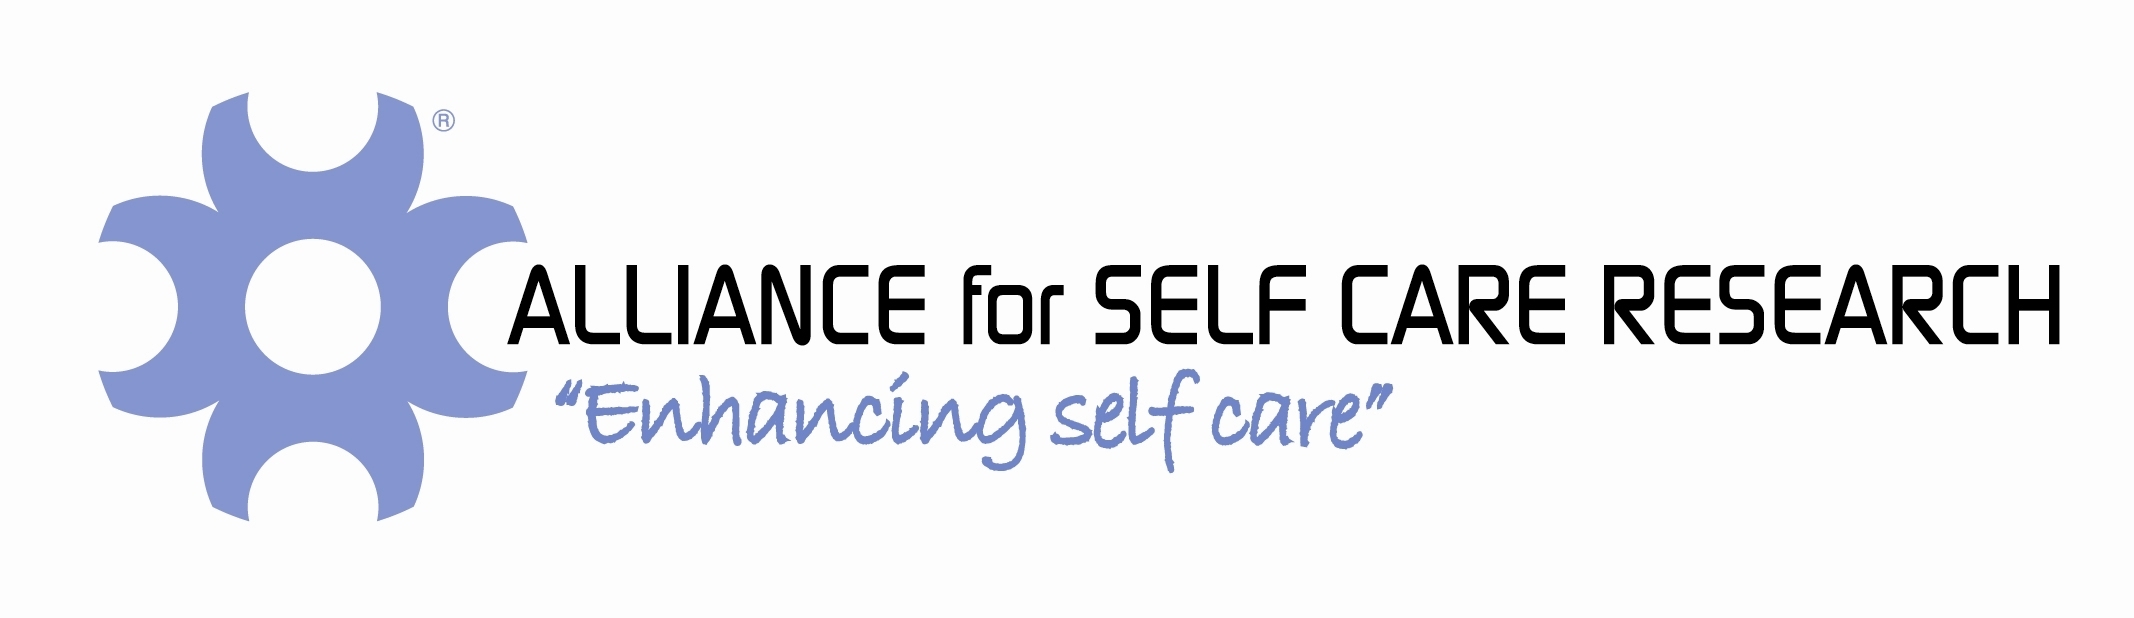 The Alliance for Self Care Research logo